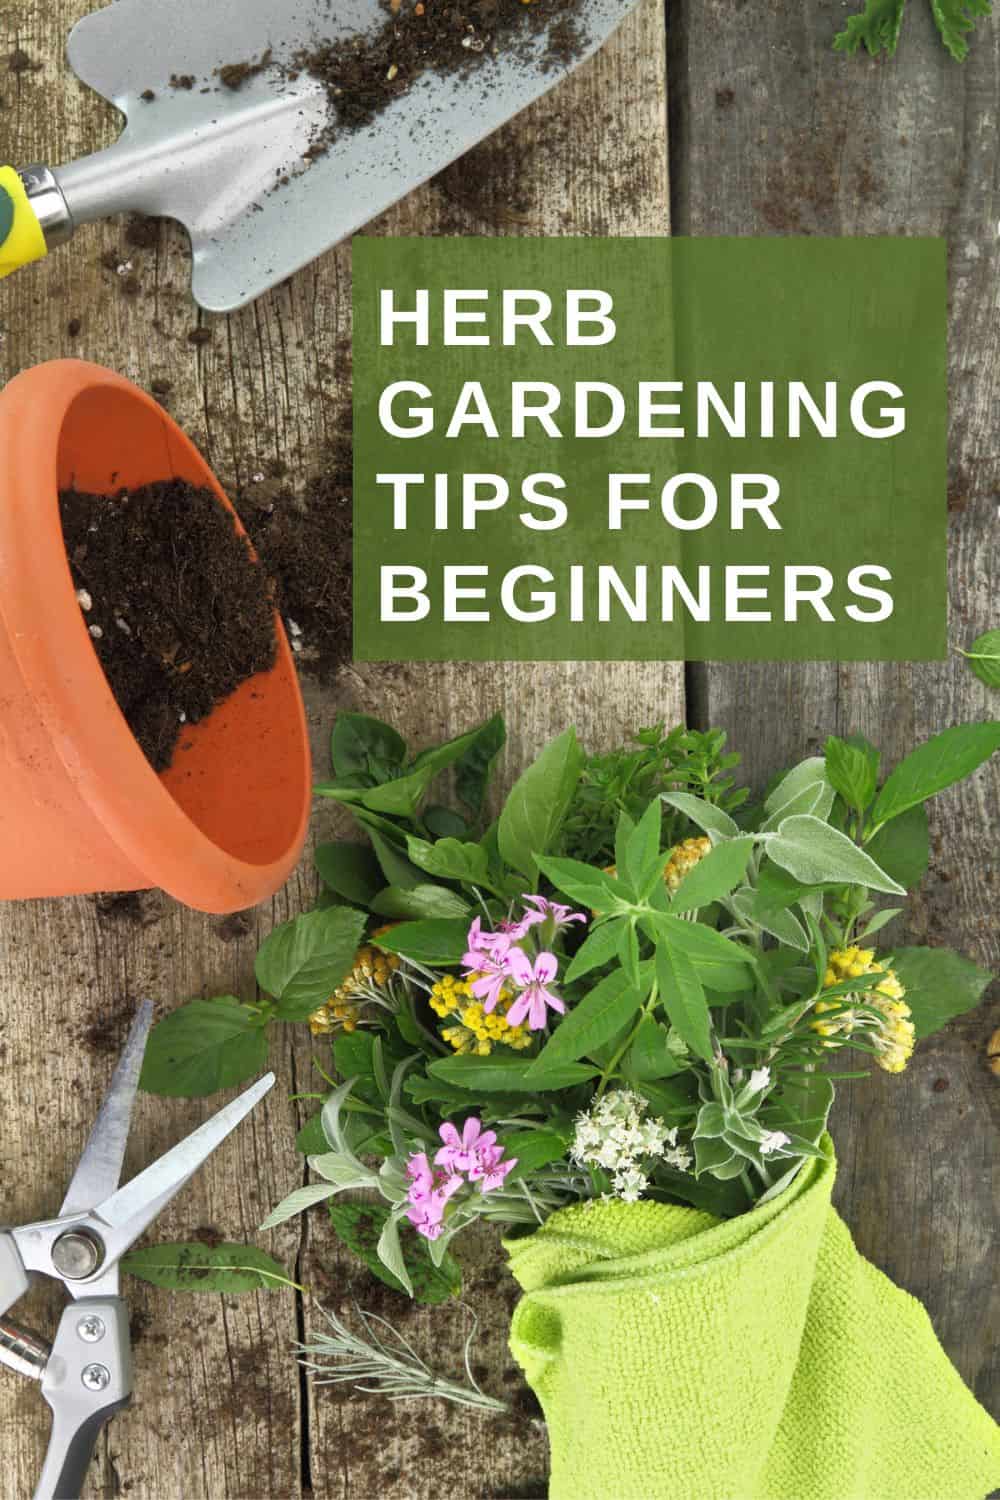 herb gardening supplies on a wooden background with text overlay 'herb gardening tips for beginners'